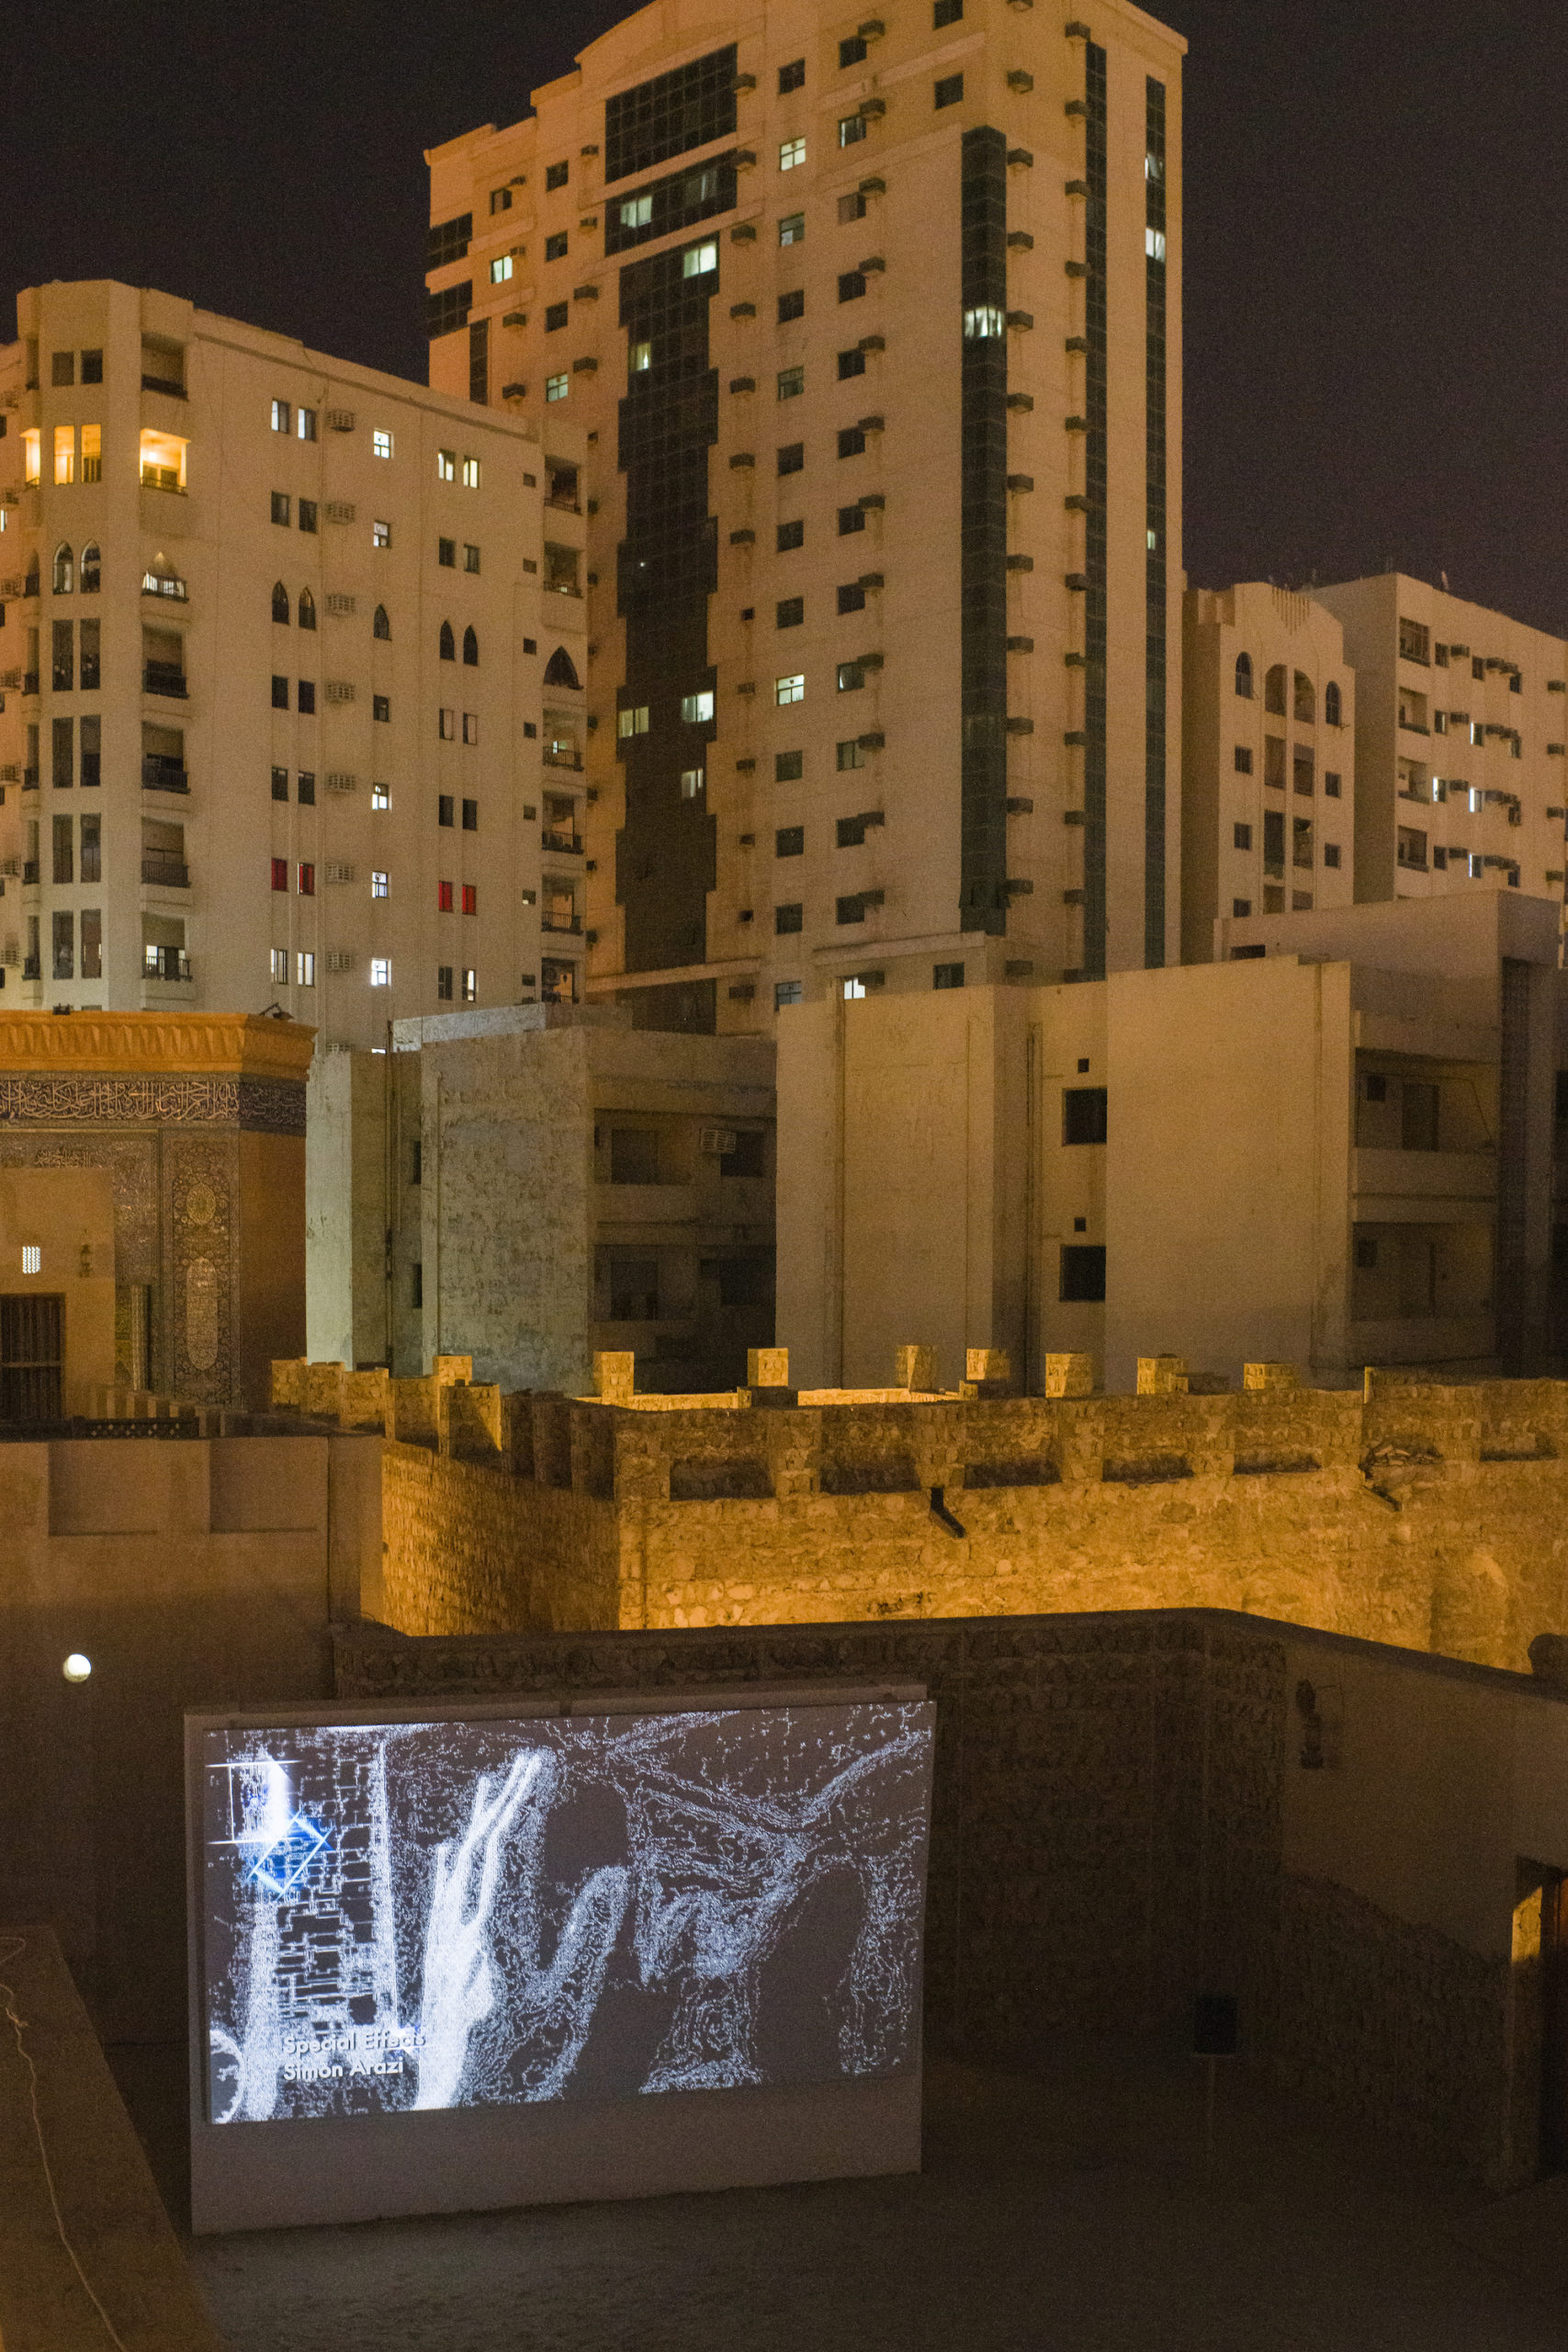 Amid a white and tan city scape made of concrete and stone, a screen depicting a pixelated hand sits in the bottom left corner of the image.